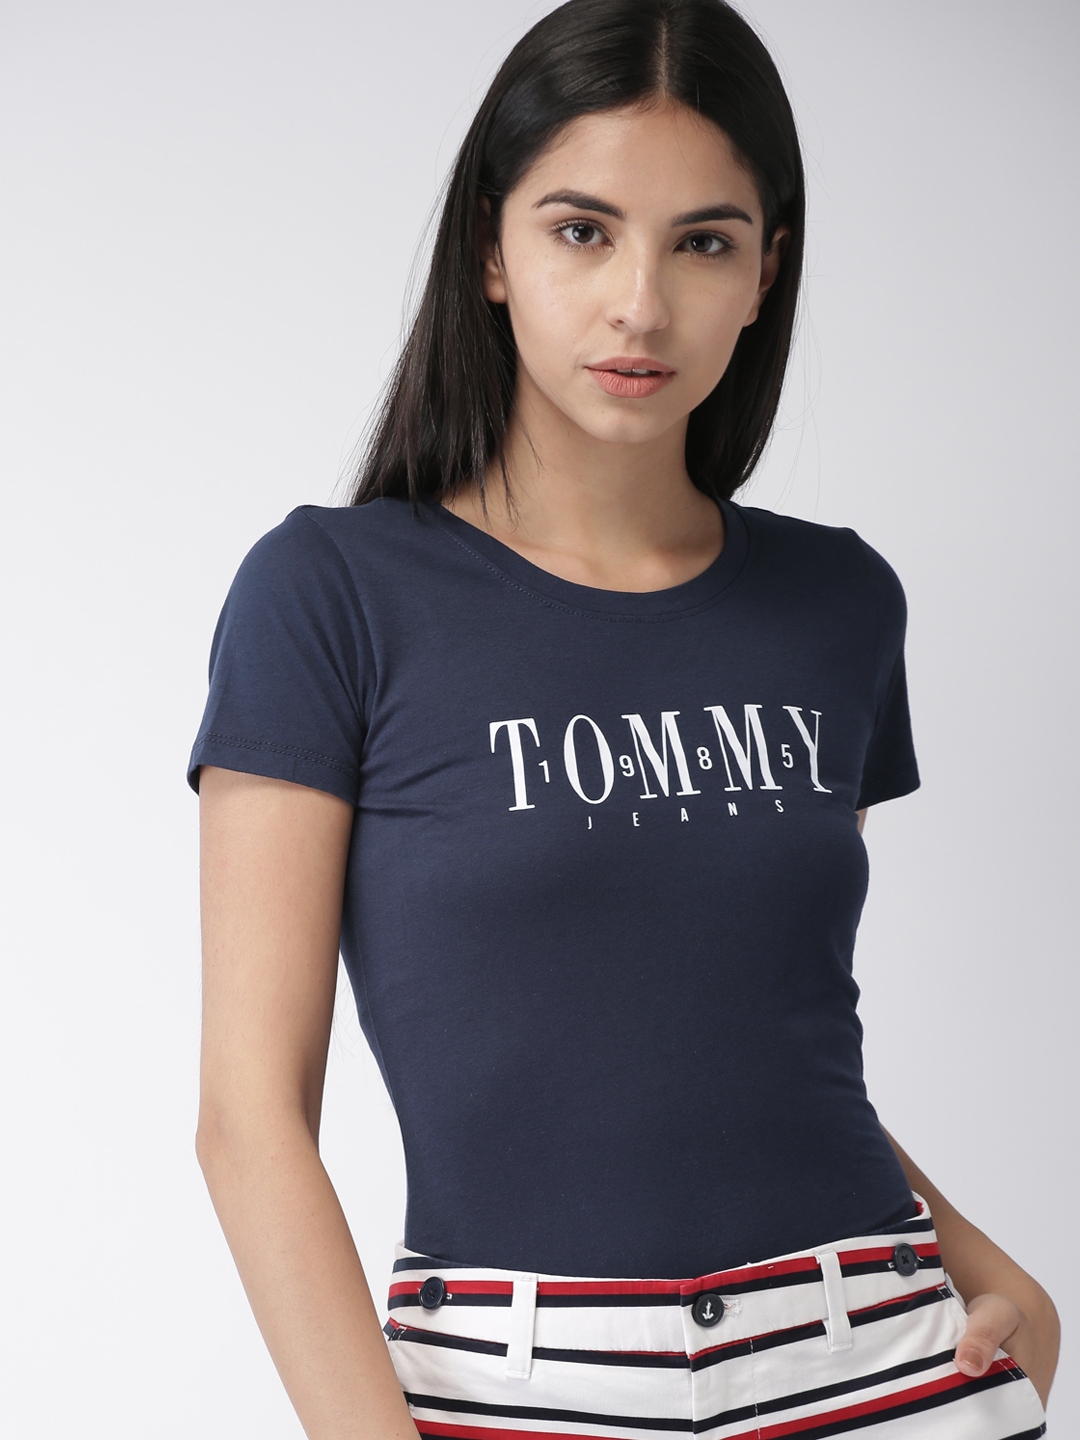 Buy Tommy Hilfiger Women Navy Blue Slim Fit Printed Round Neck T Shirt Tshirts For Women